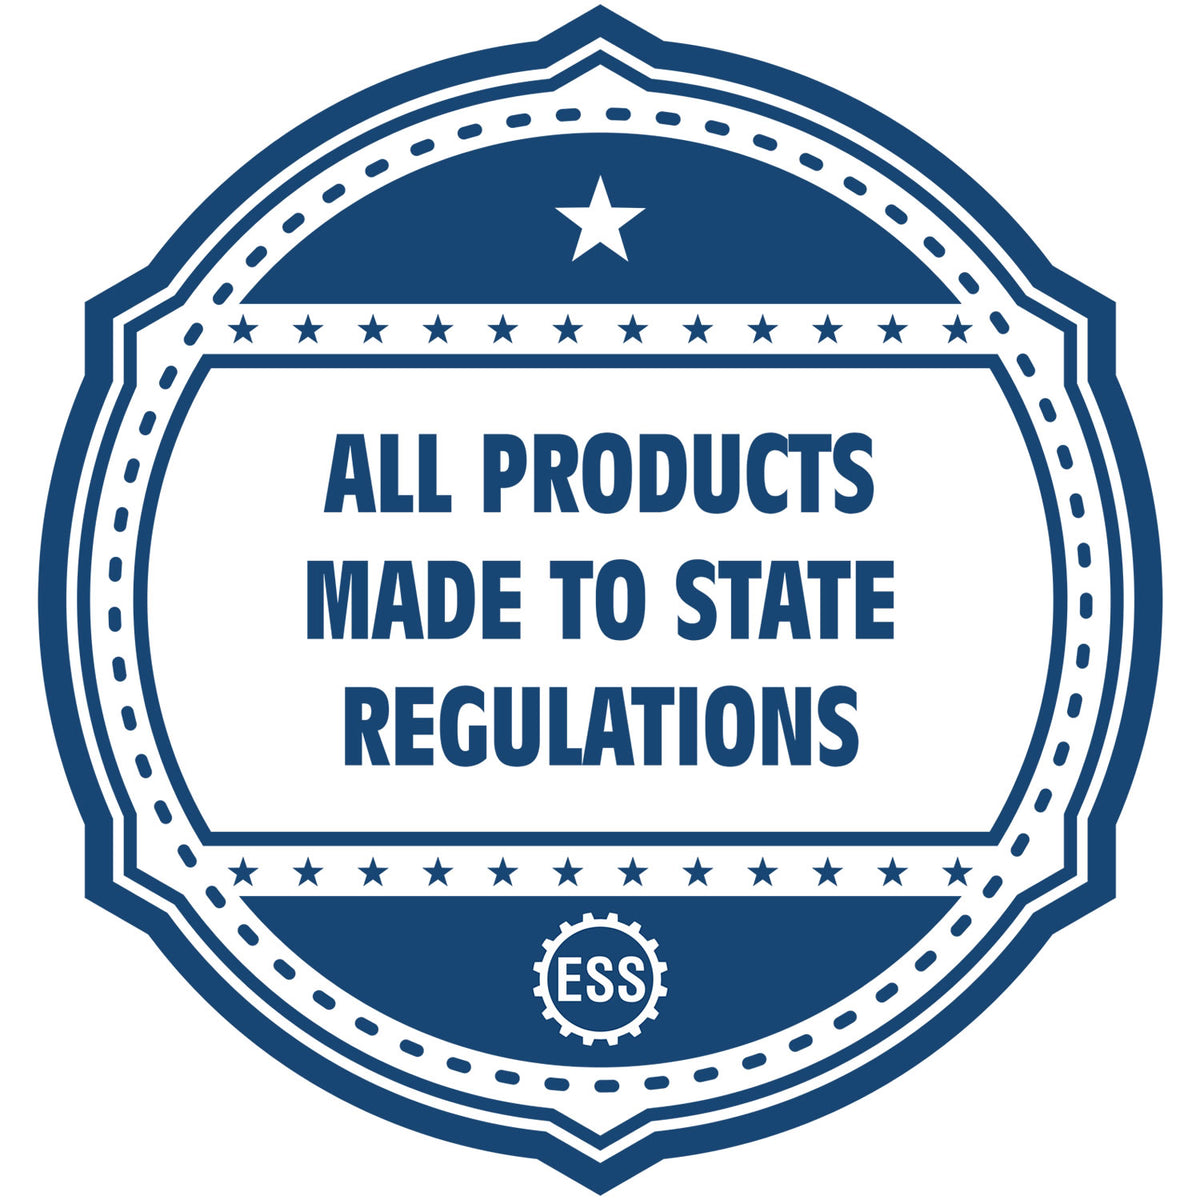 An icon or badge element for the Digital Tennessee Landscape Architect Stamp showing that this product is made in compliance with state regulations.